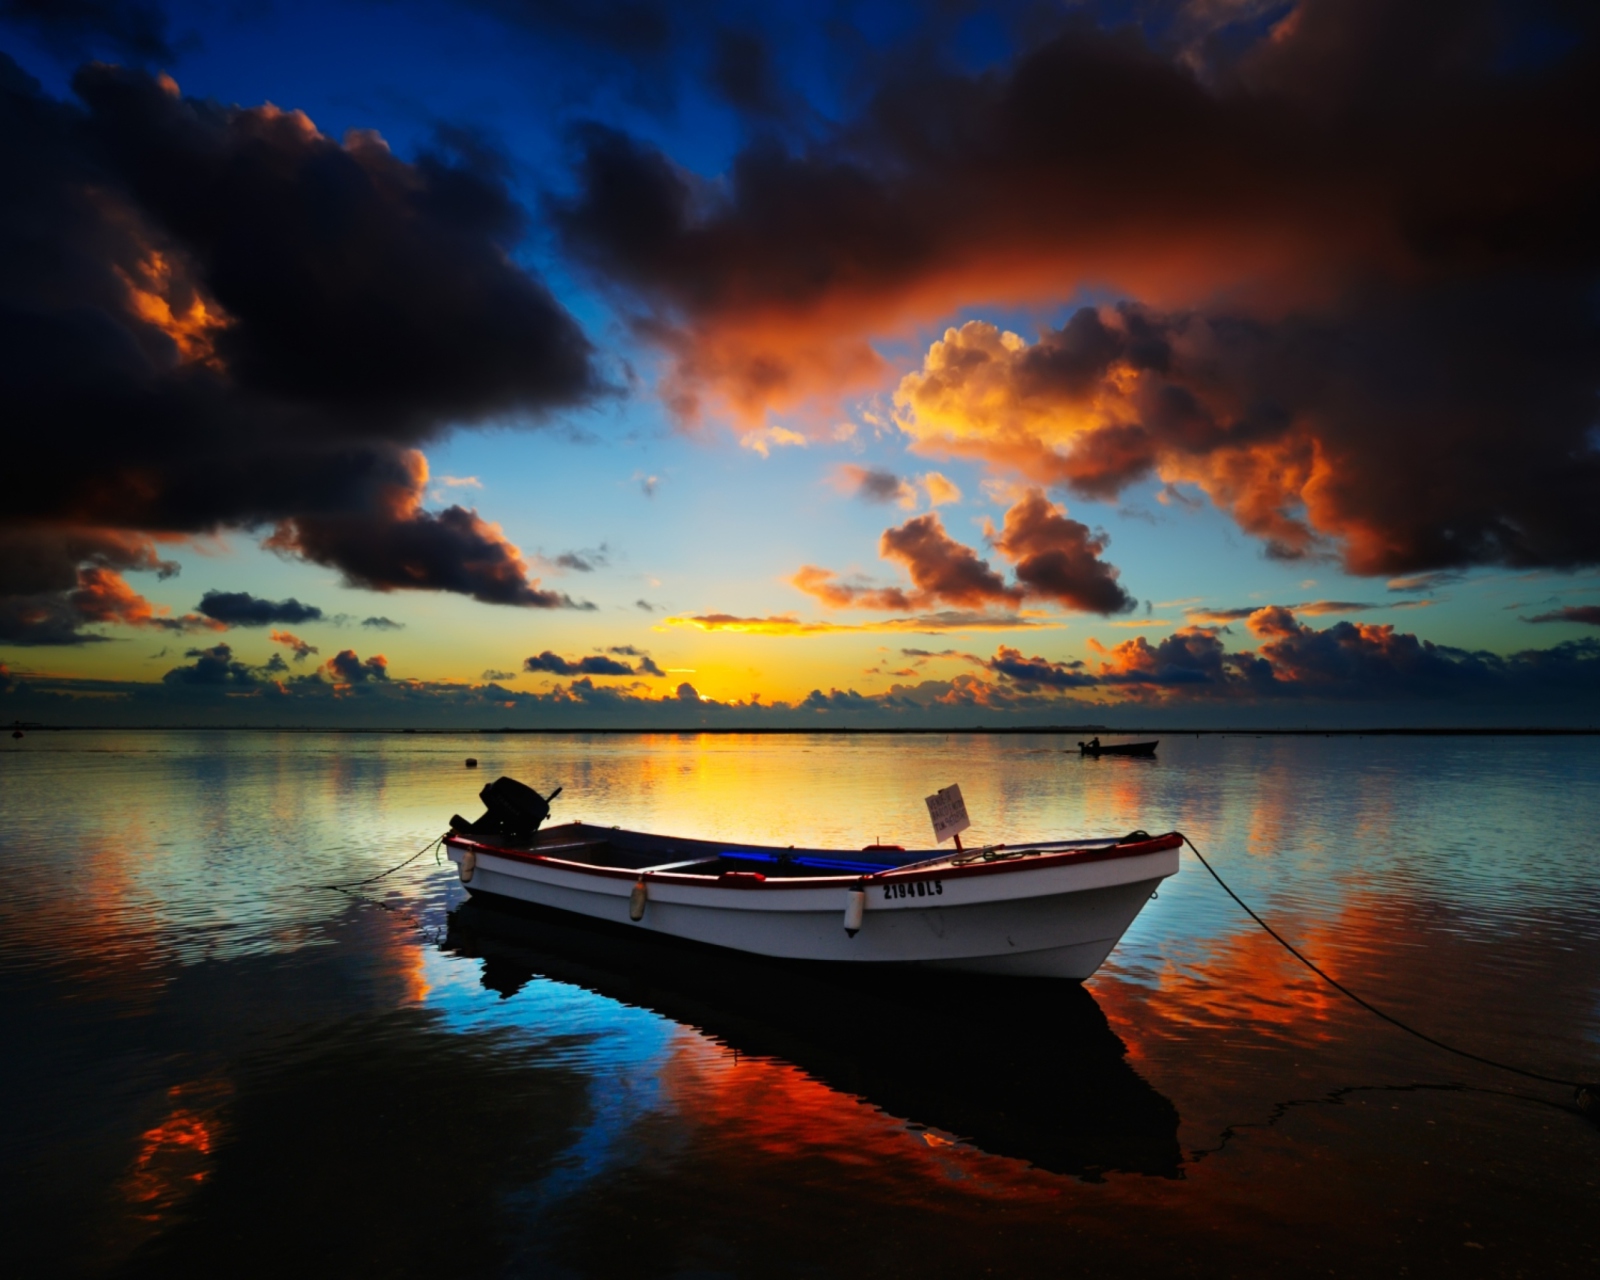 Boat In Sea At Sunset wallpaper 1600x1280